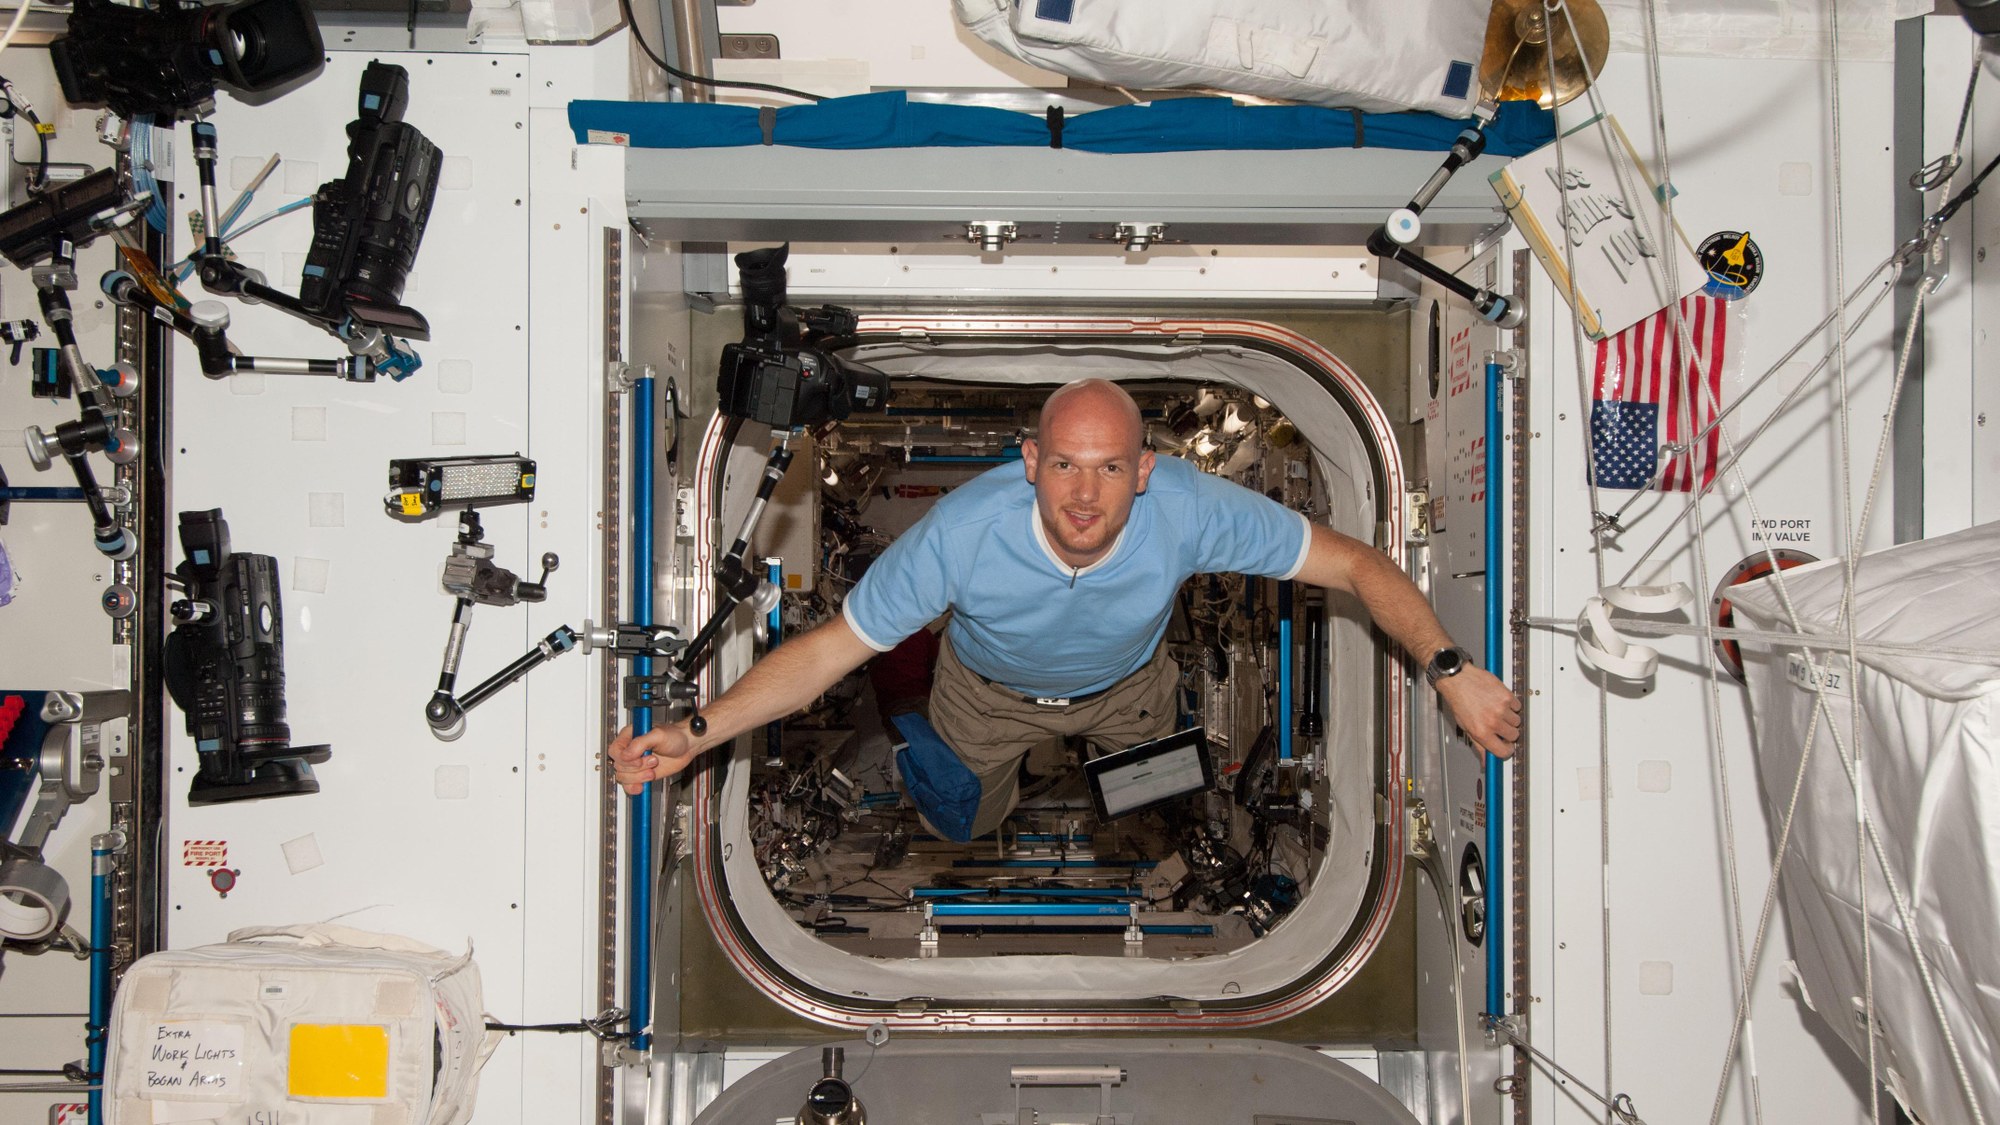 Living and working in microgravity